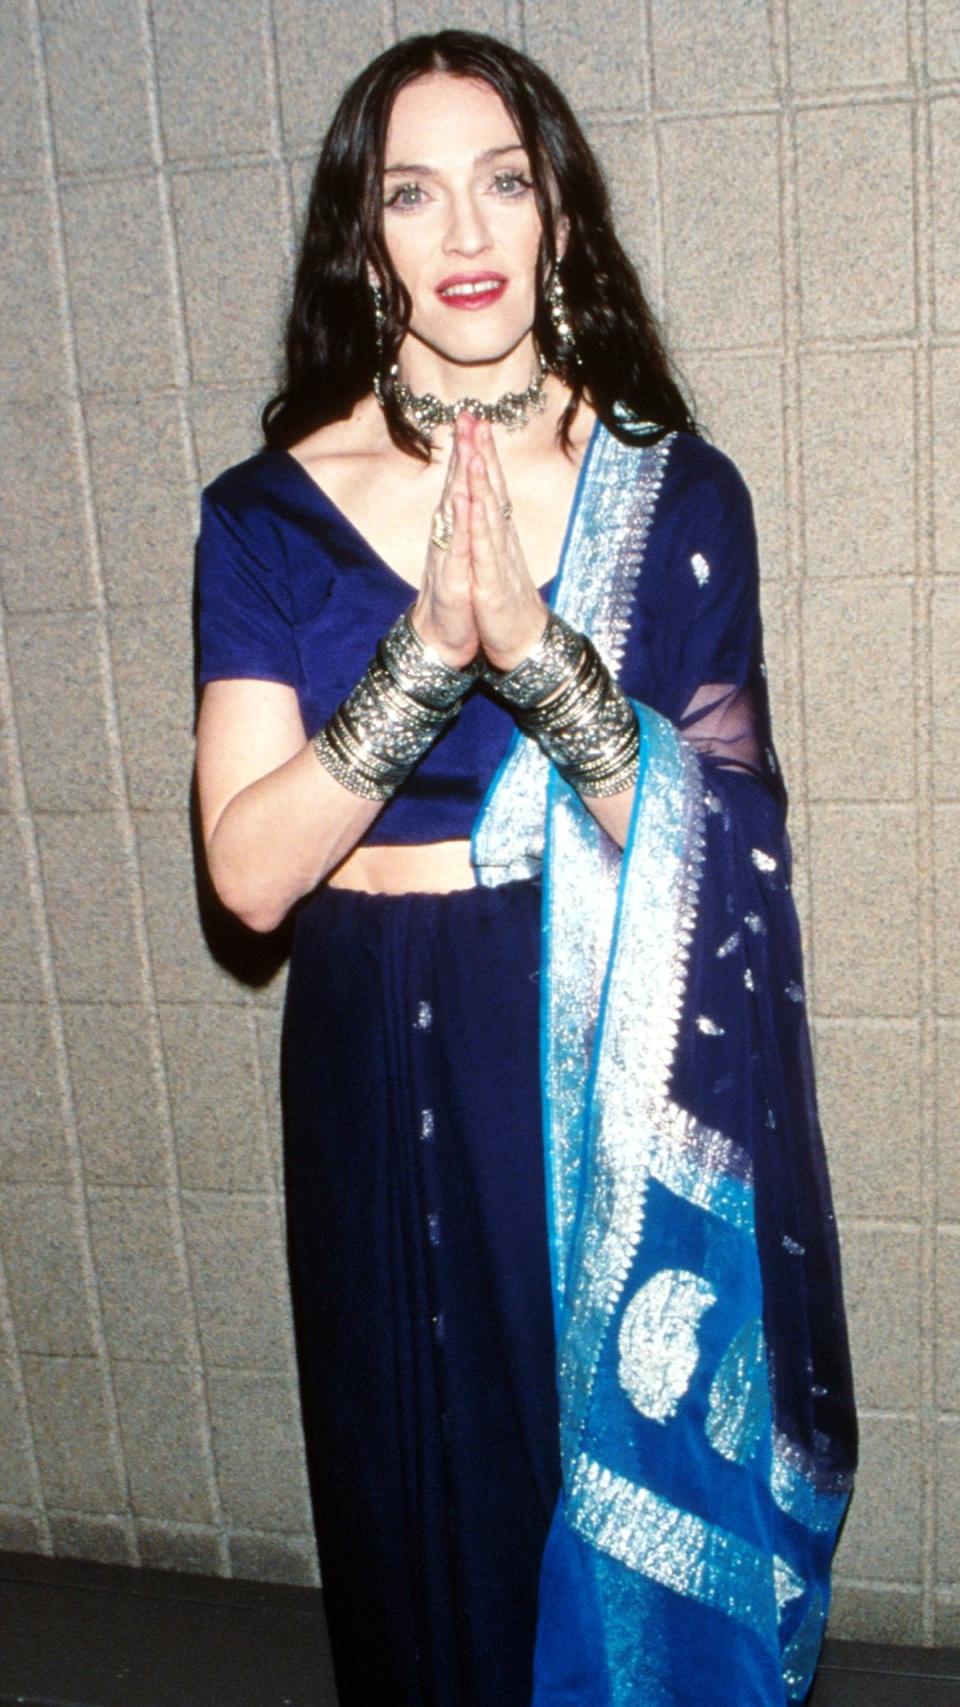 <p> At the same event she donned the corseted yellow gown, Madonna changed into this traditional sari get-up backstage. From the spiritual attire to the loose black curls, Madonna was certainly making a point that she had begun a new era - one more reflective, mature and removed from her wilder past. </p>